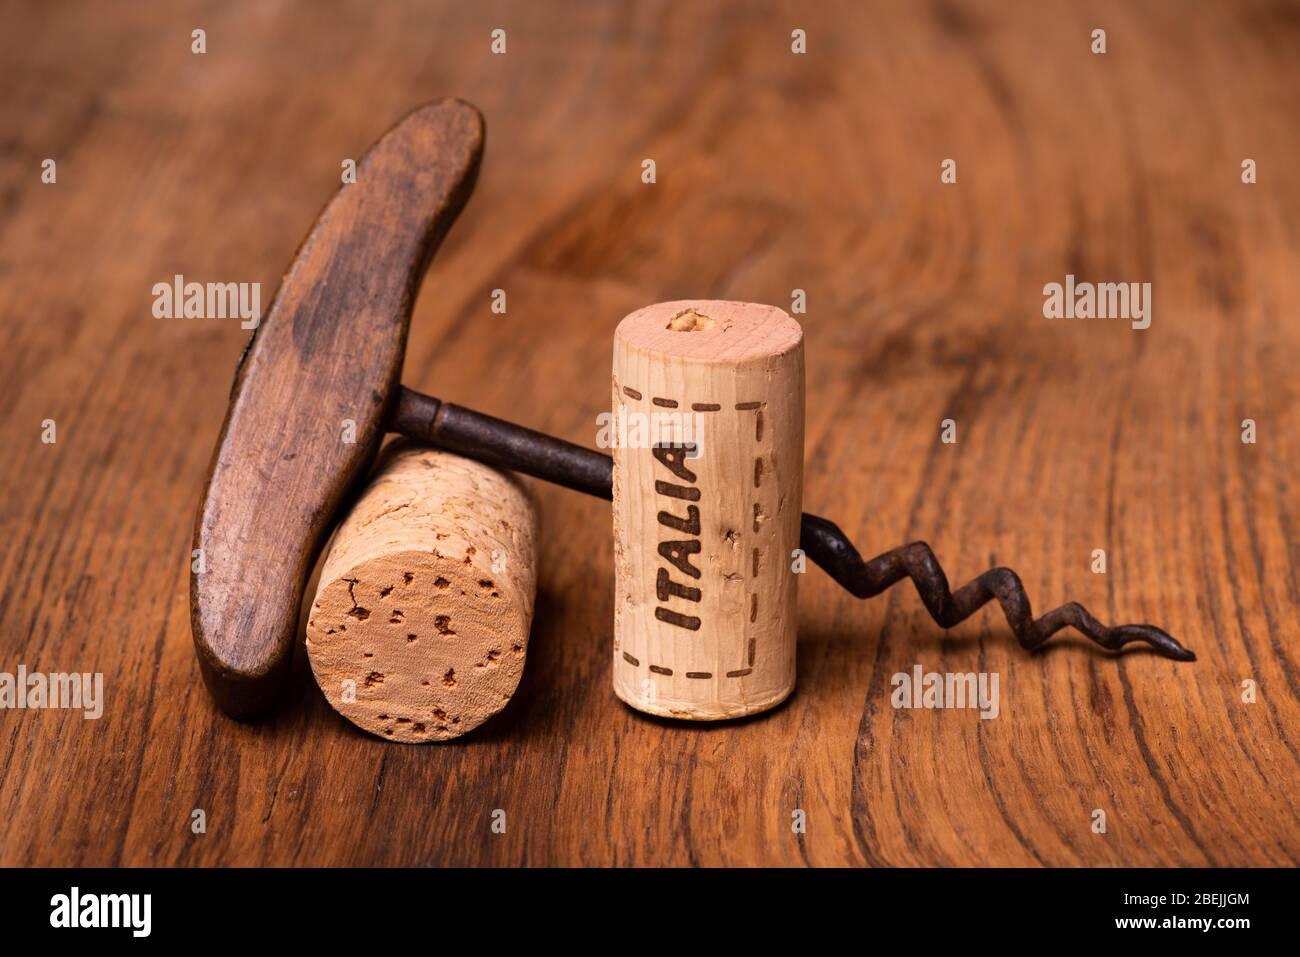 in the foreground, on raw wood, Italian wine corks and vintage corkscrews Stock Photo